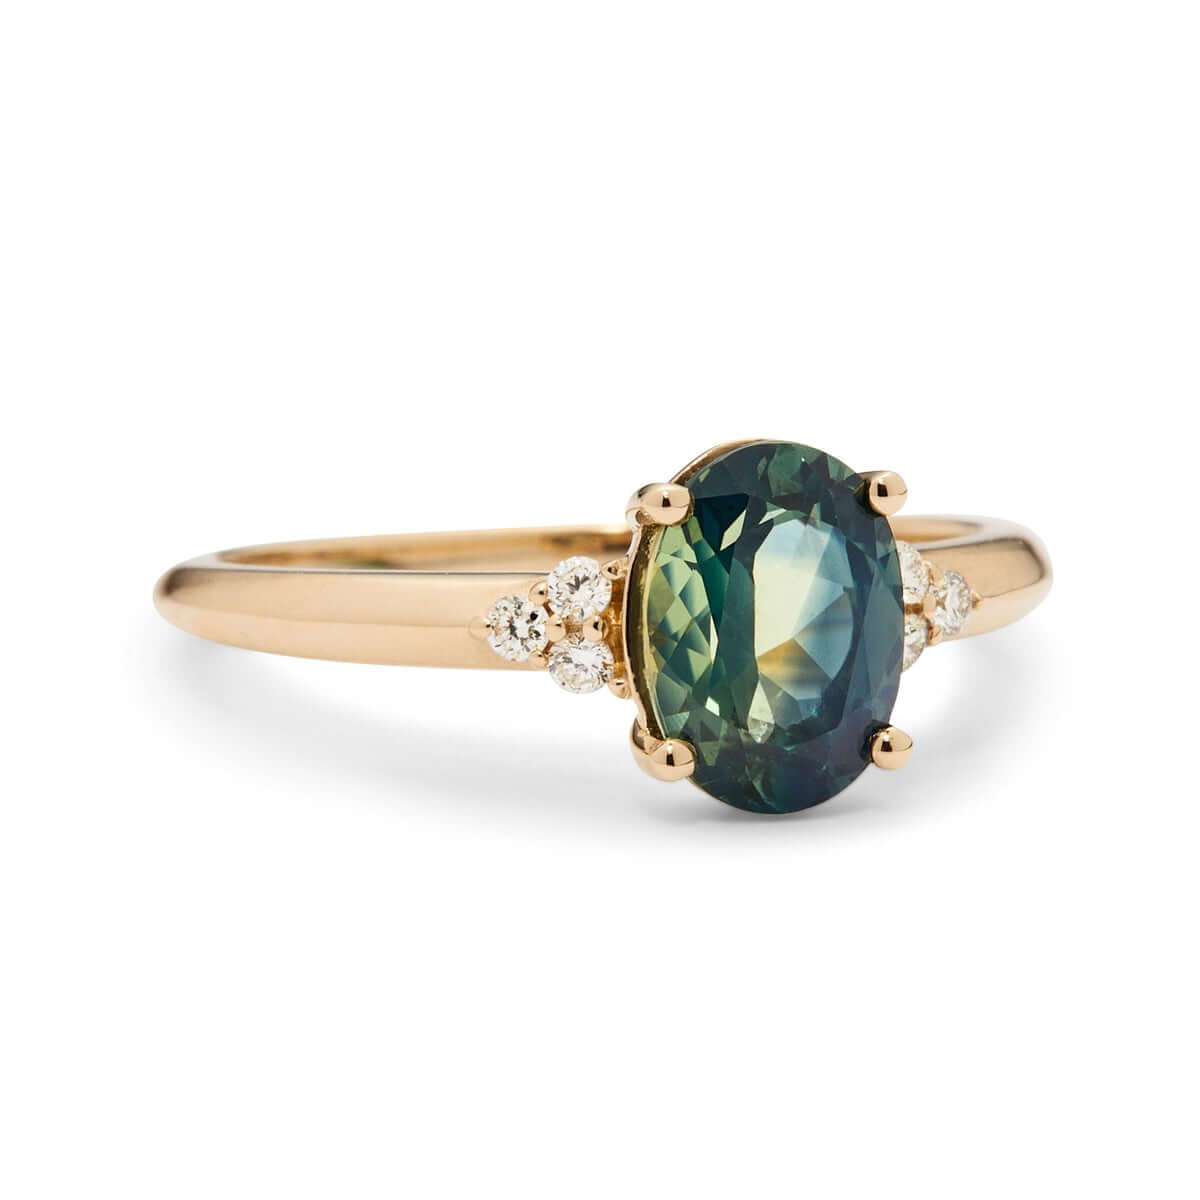 A side view of a yellow gold ring on a hand, displaying a teal Australian sapphire set with a triangle of small diamonds.